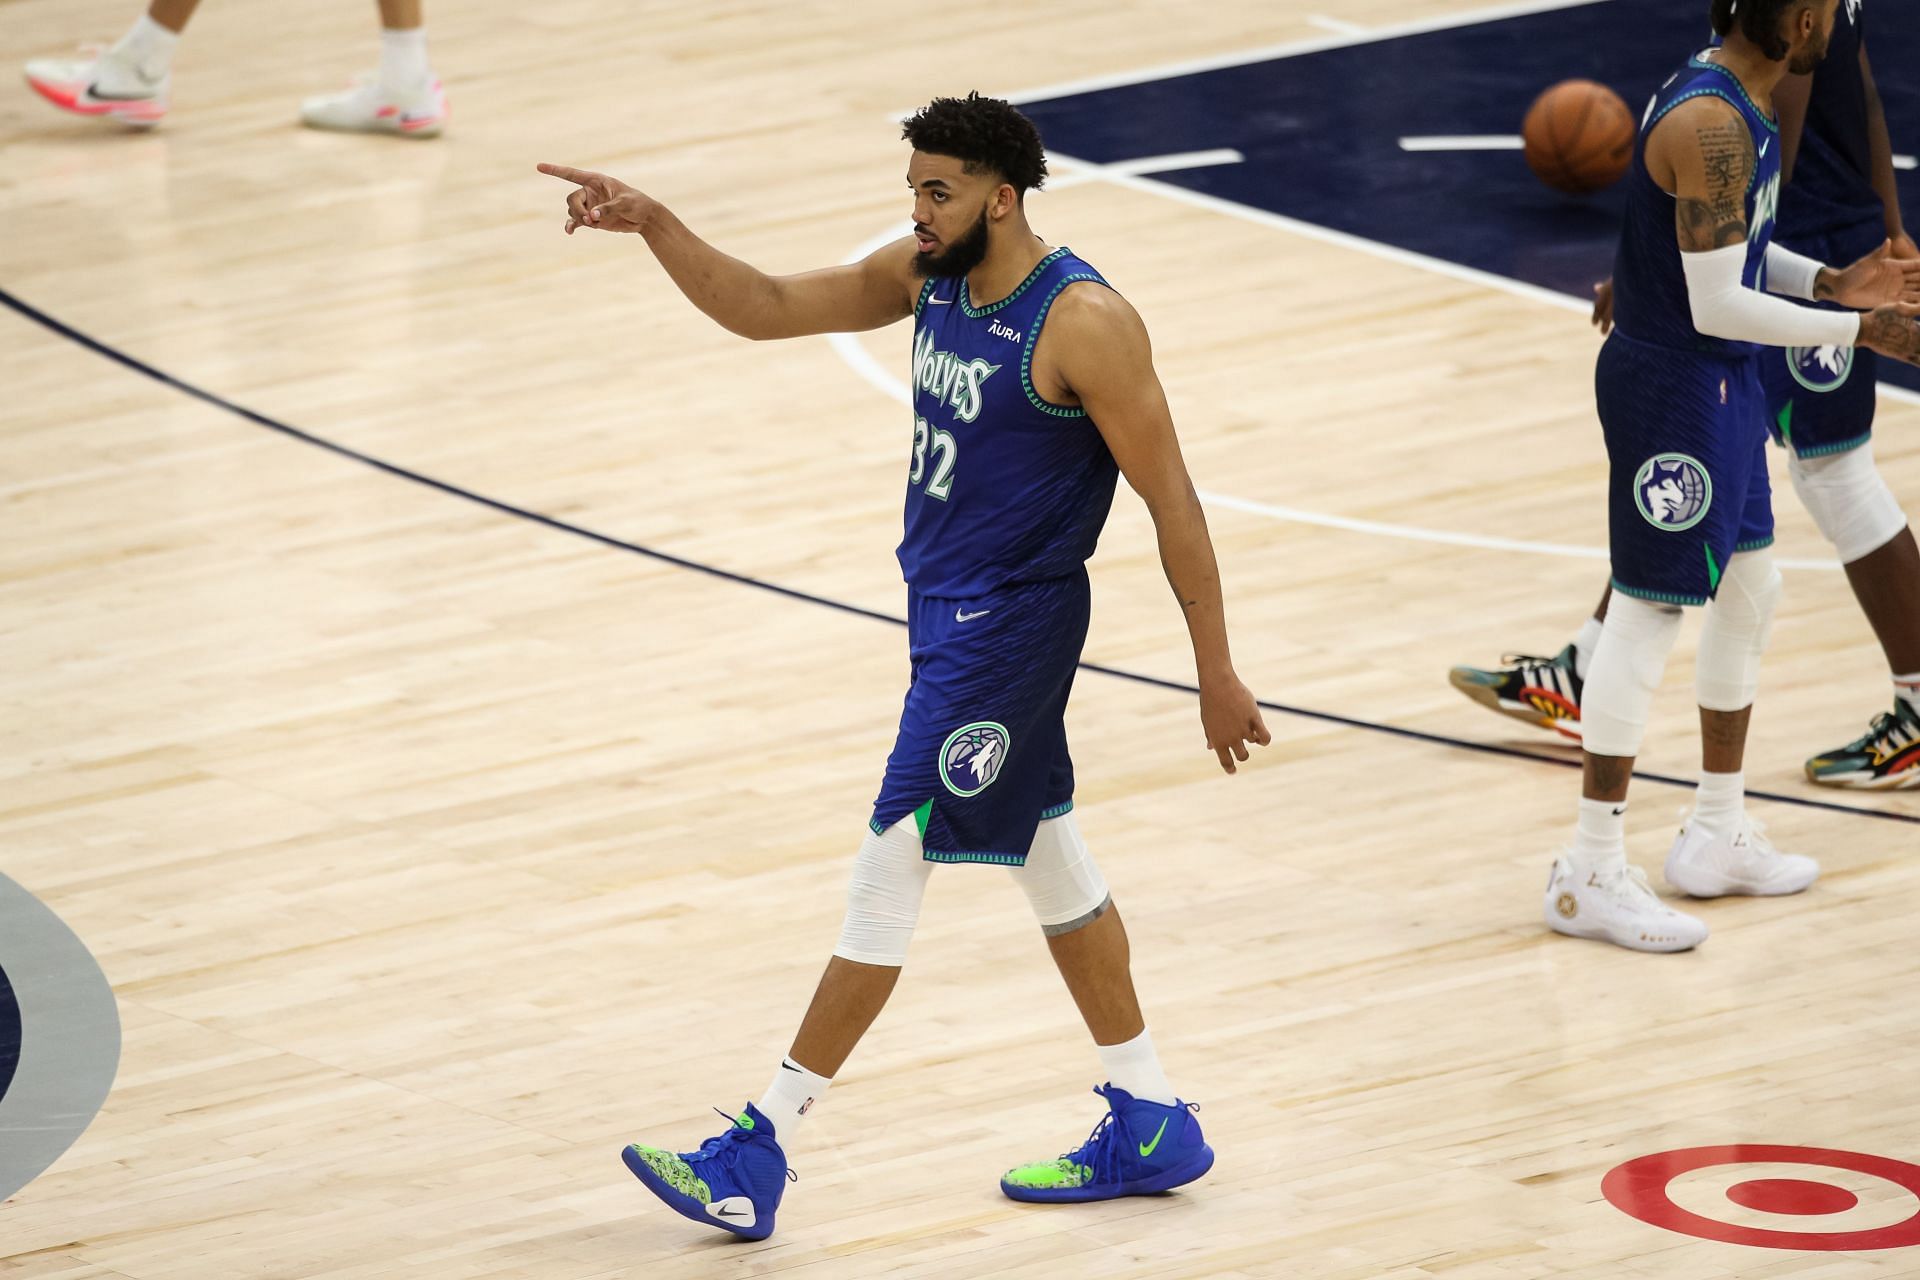 Karl-Anthony Towns of the Minnesota Timberwolves